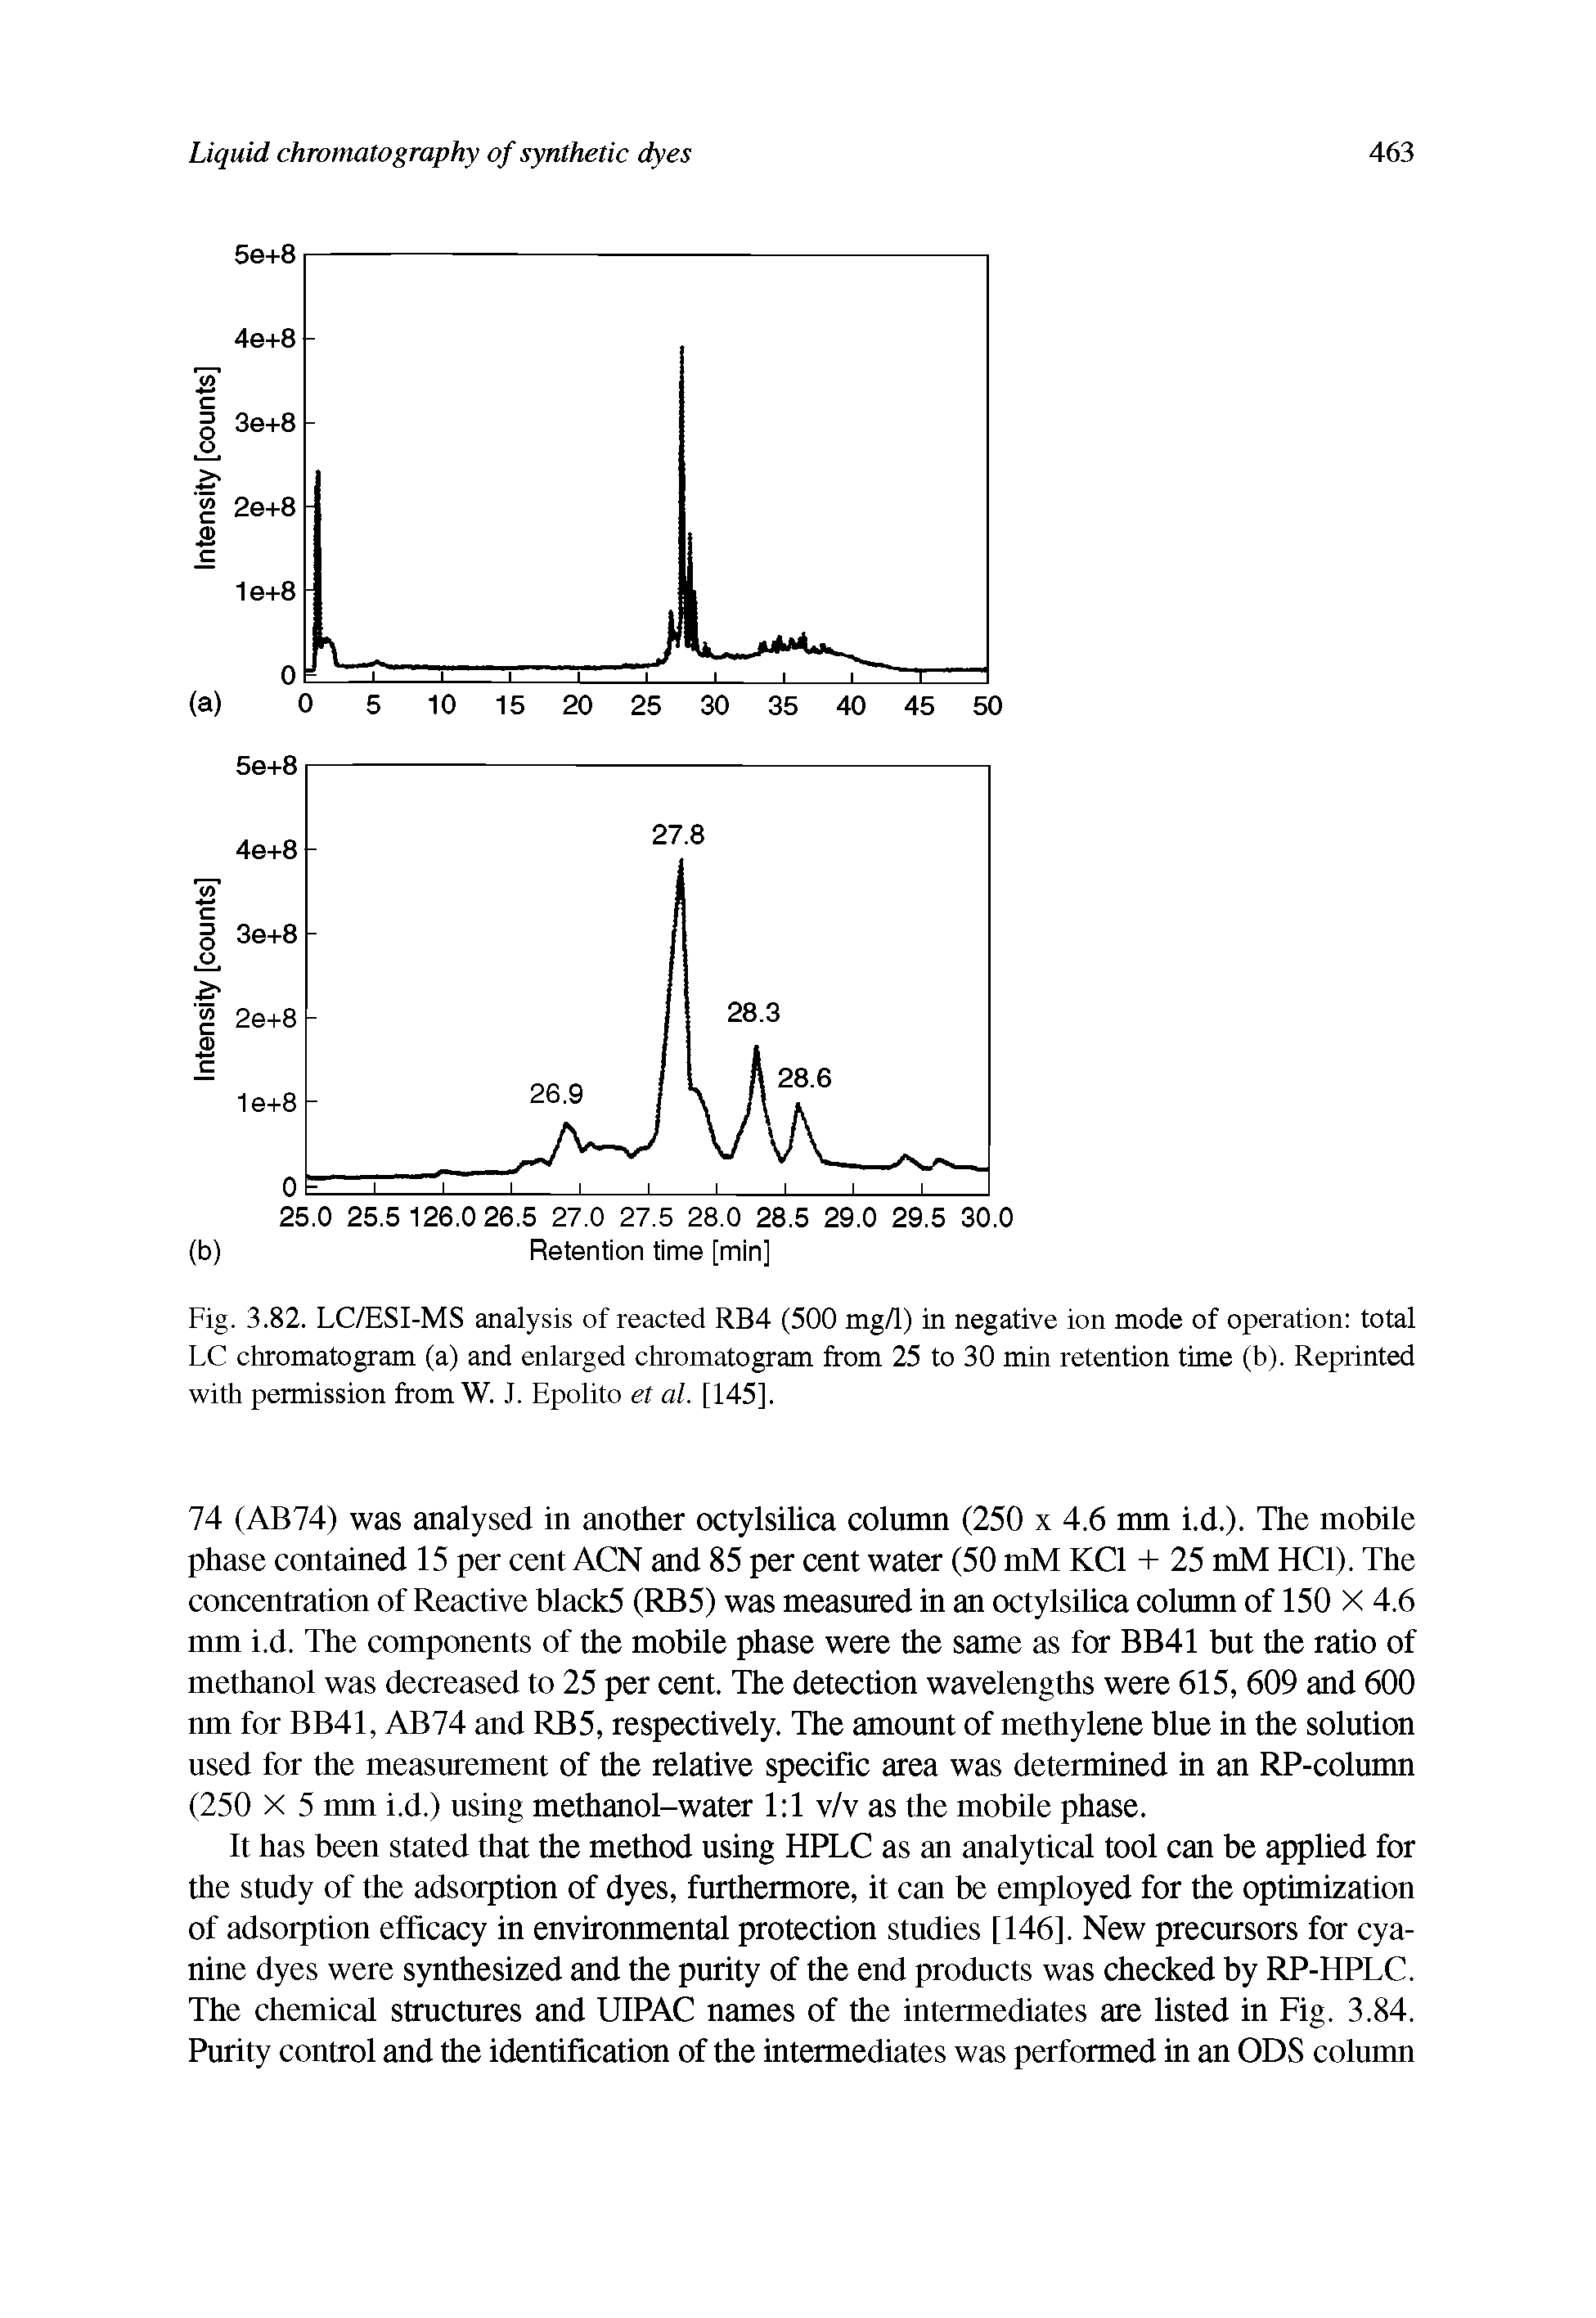 Fig. 3.82. LC/ESI-MS analysis of reacted RB4 (500 mg/1) in negative ion mode of operation total LC chromatogram (a) and enlarged chromatogram from 25 to 30 min retention time (b). Reprinted with permission from W. J. Epolito et al. [145],...